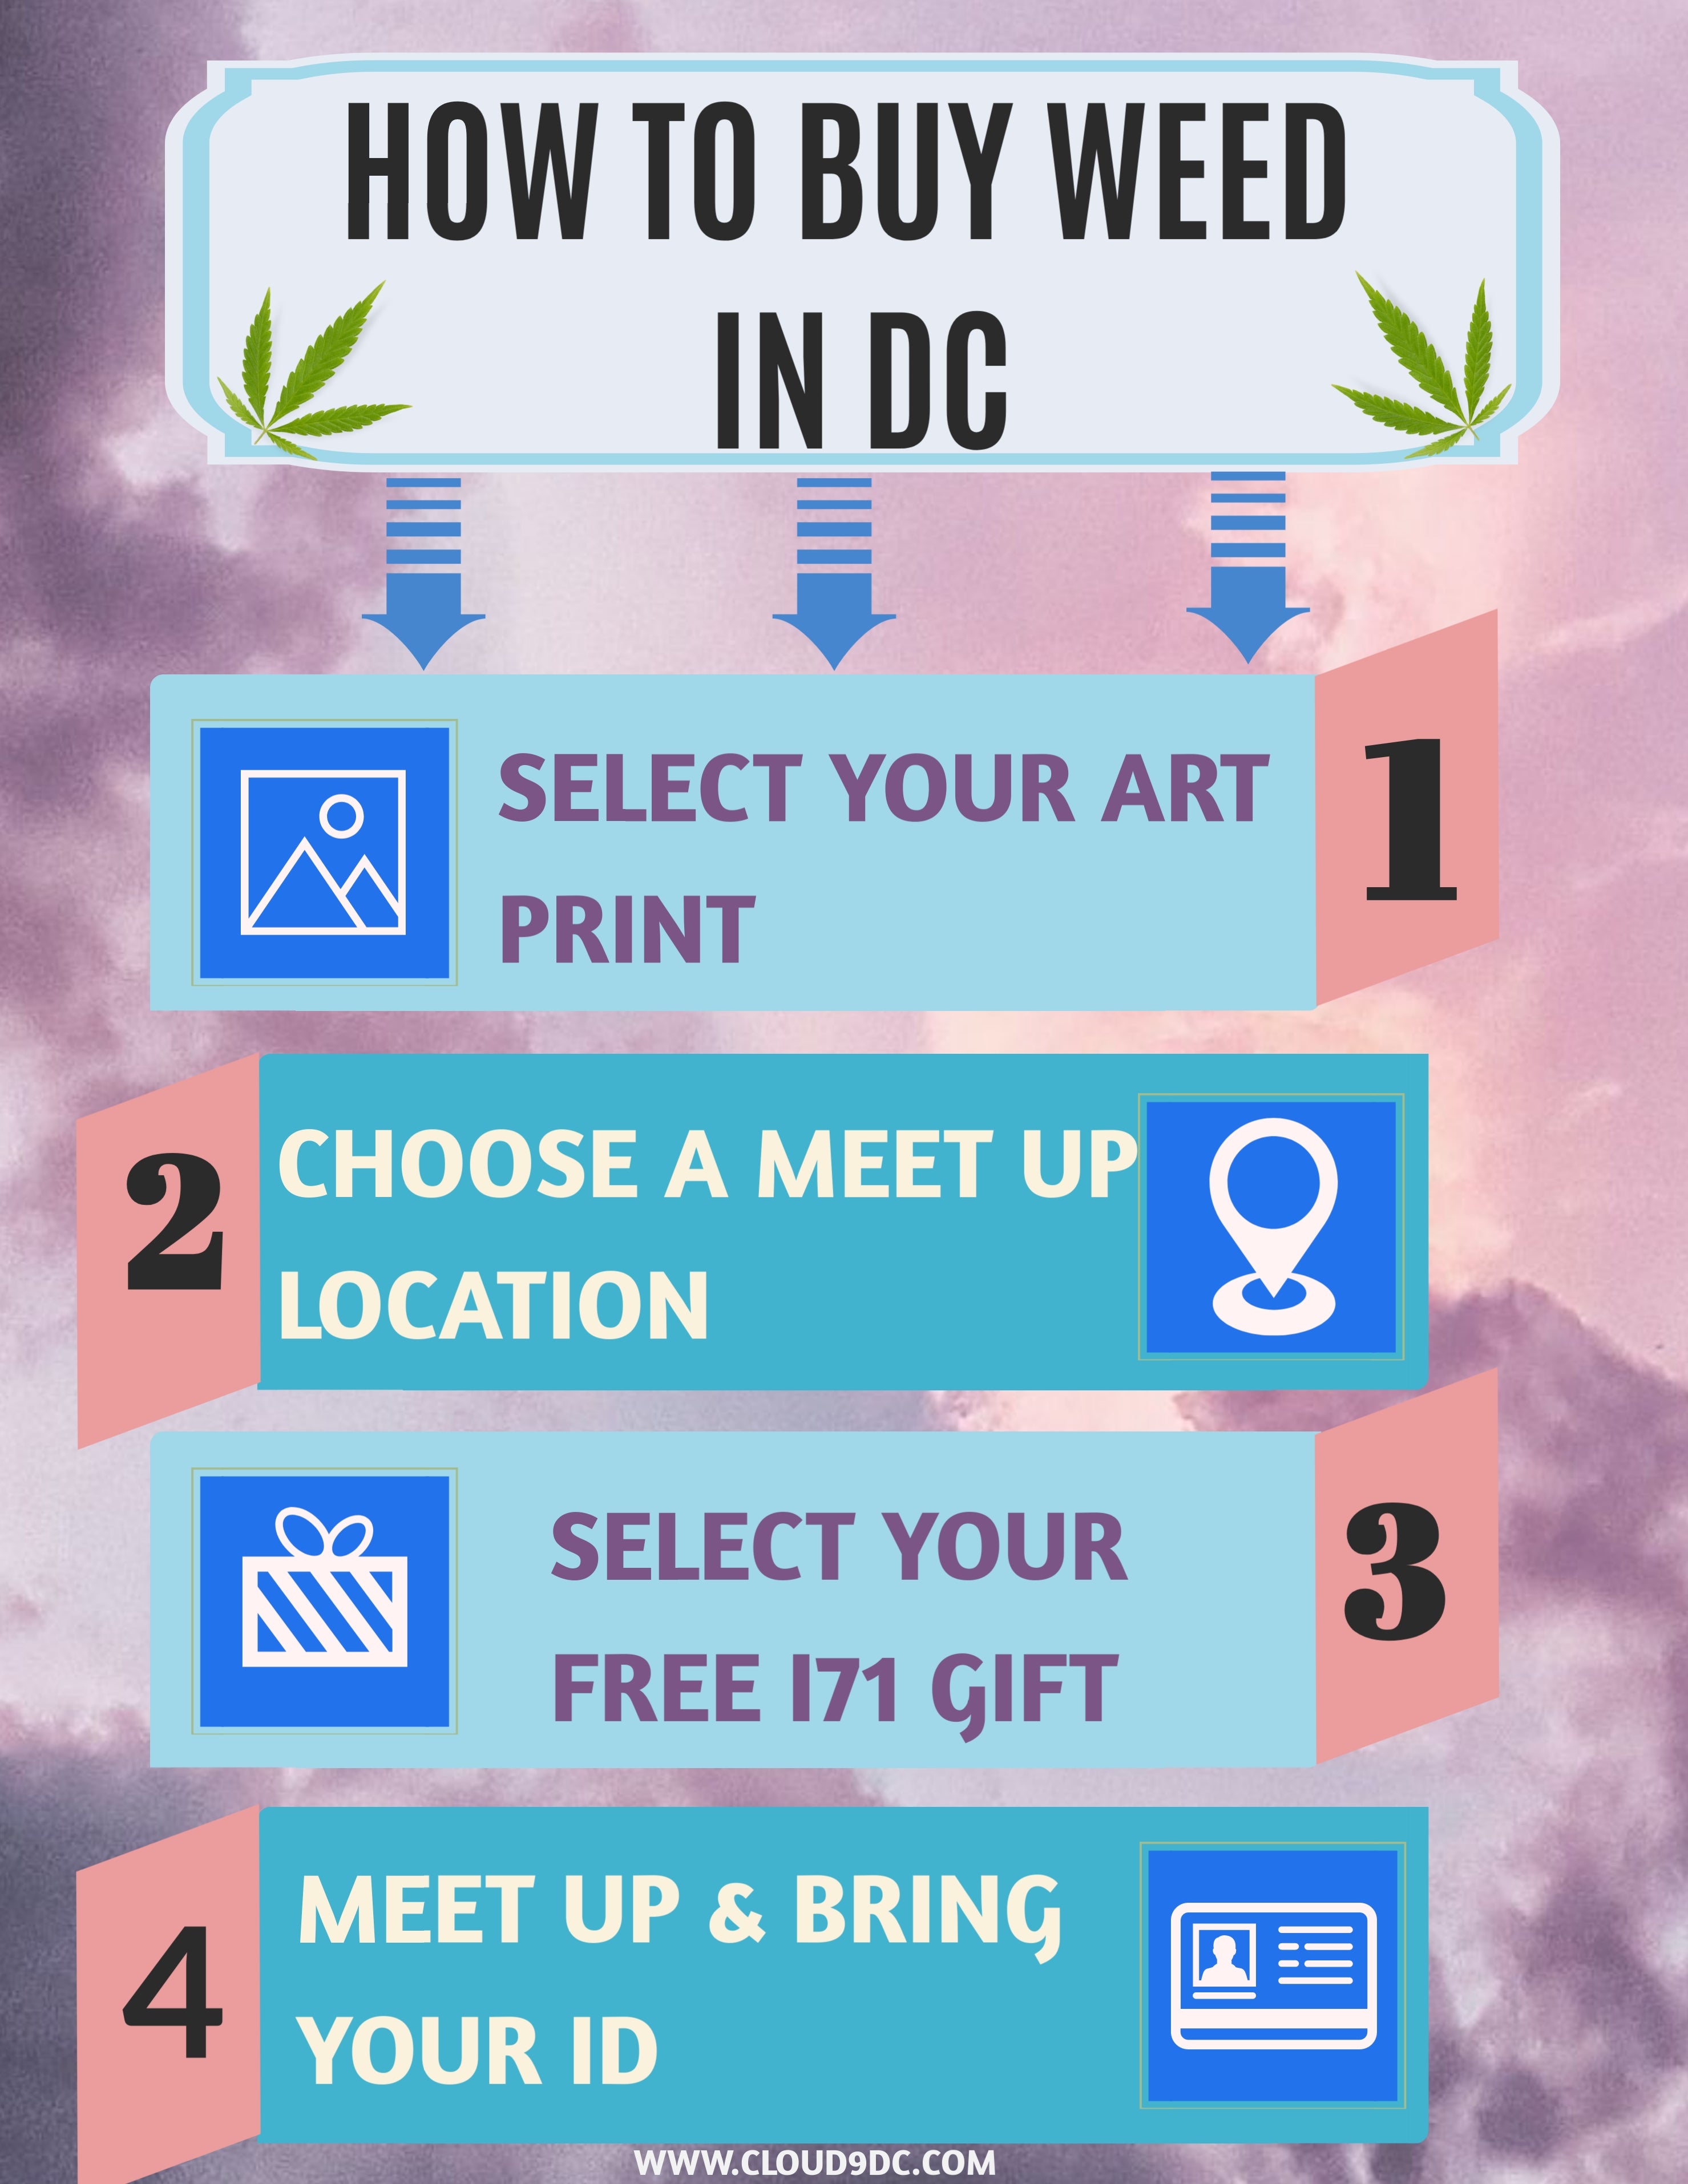 how to order weed in dc during covid19